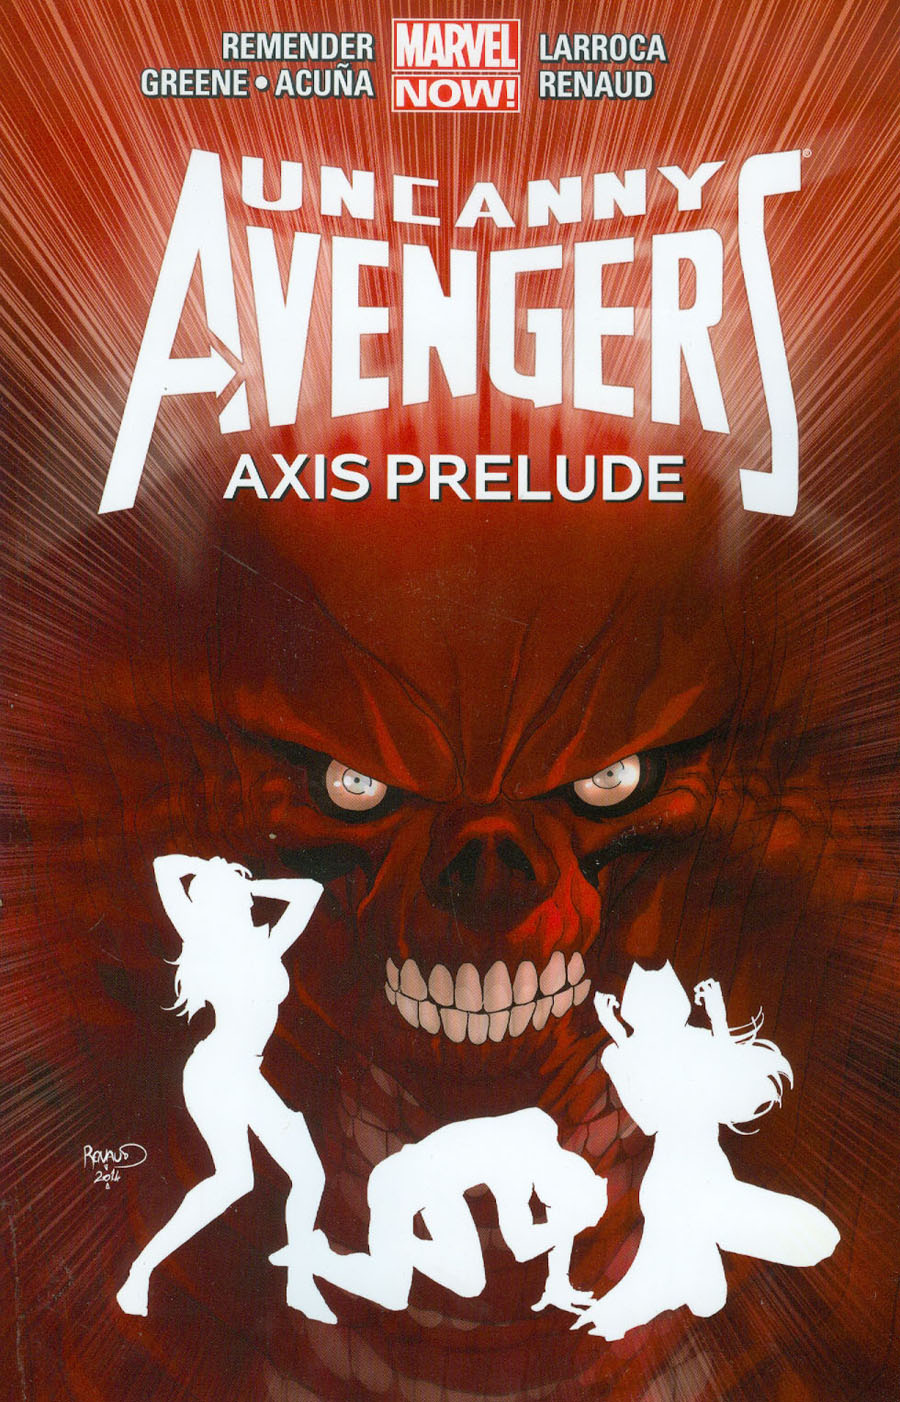 Uncanny Avengers Vol 5 AXIS Prelude TP